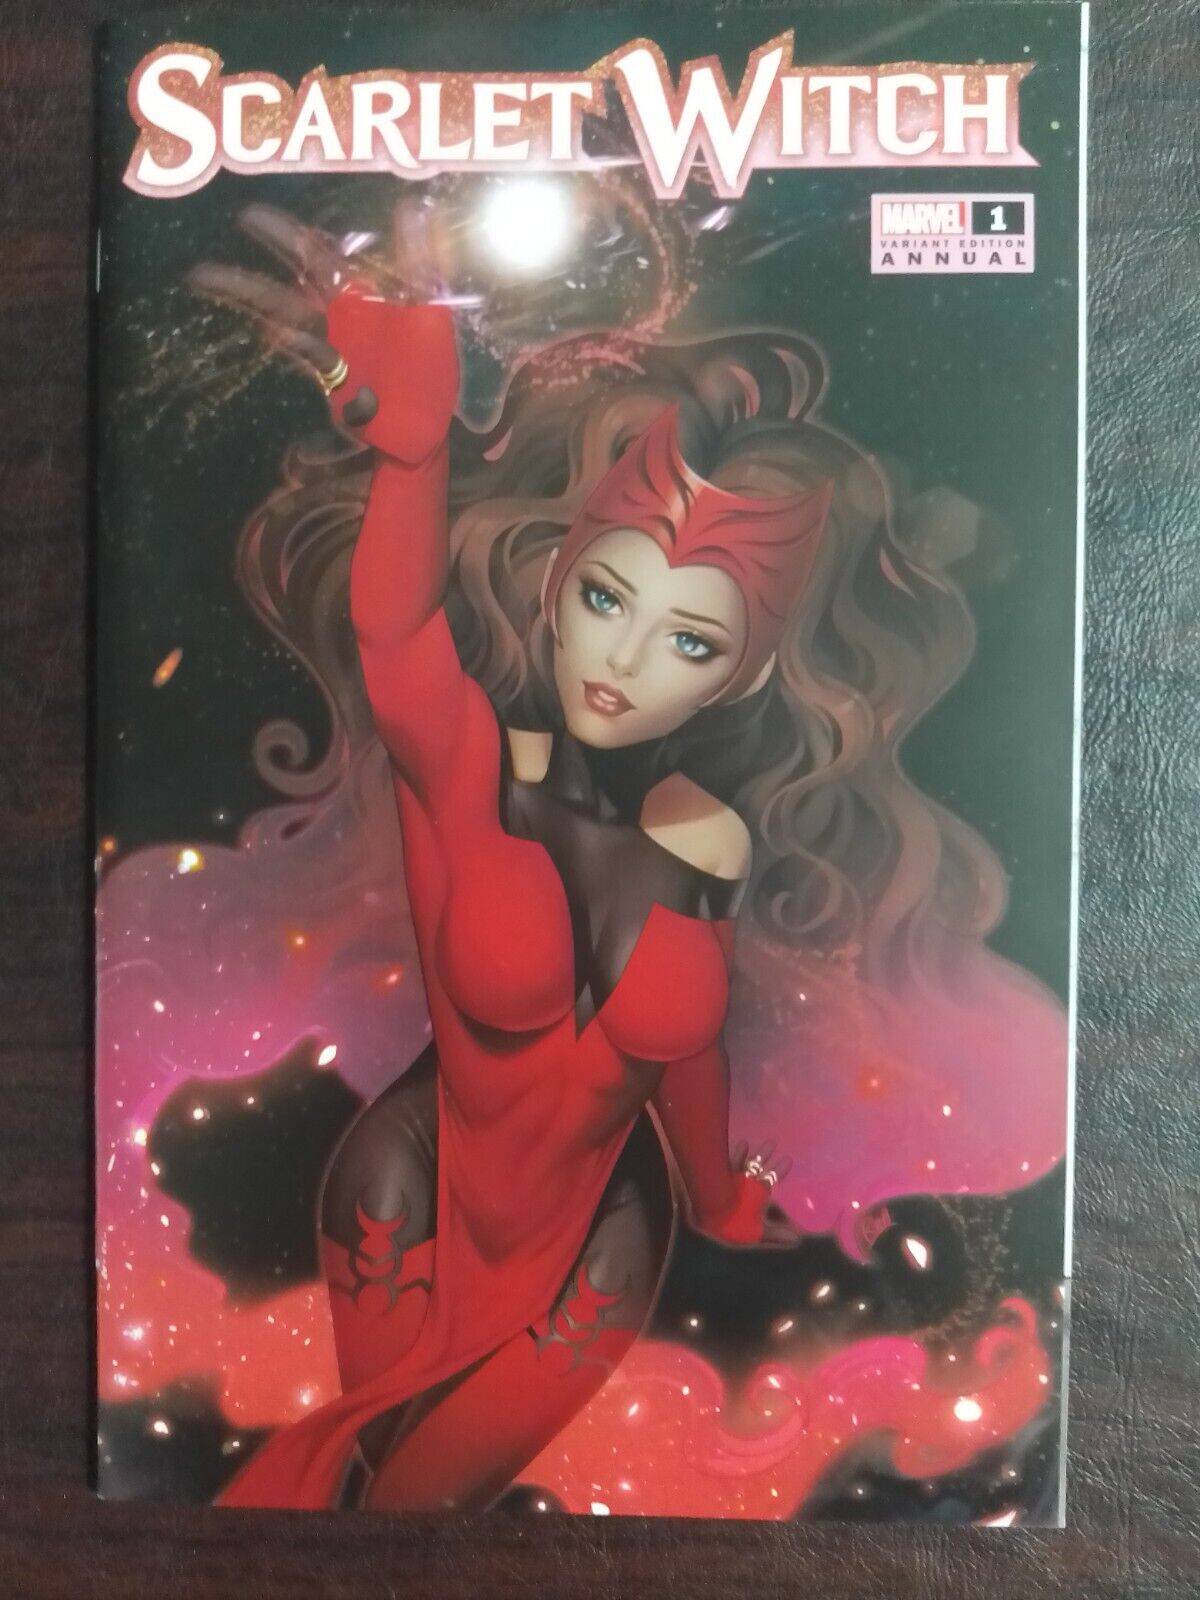 SCARLET WITCH ANNUAL #1 Comic Book  616 Comics Trade Dress Variant NM+ Marvel 